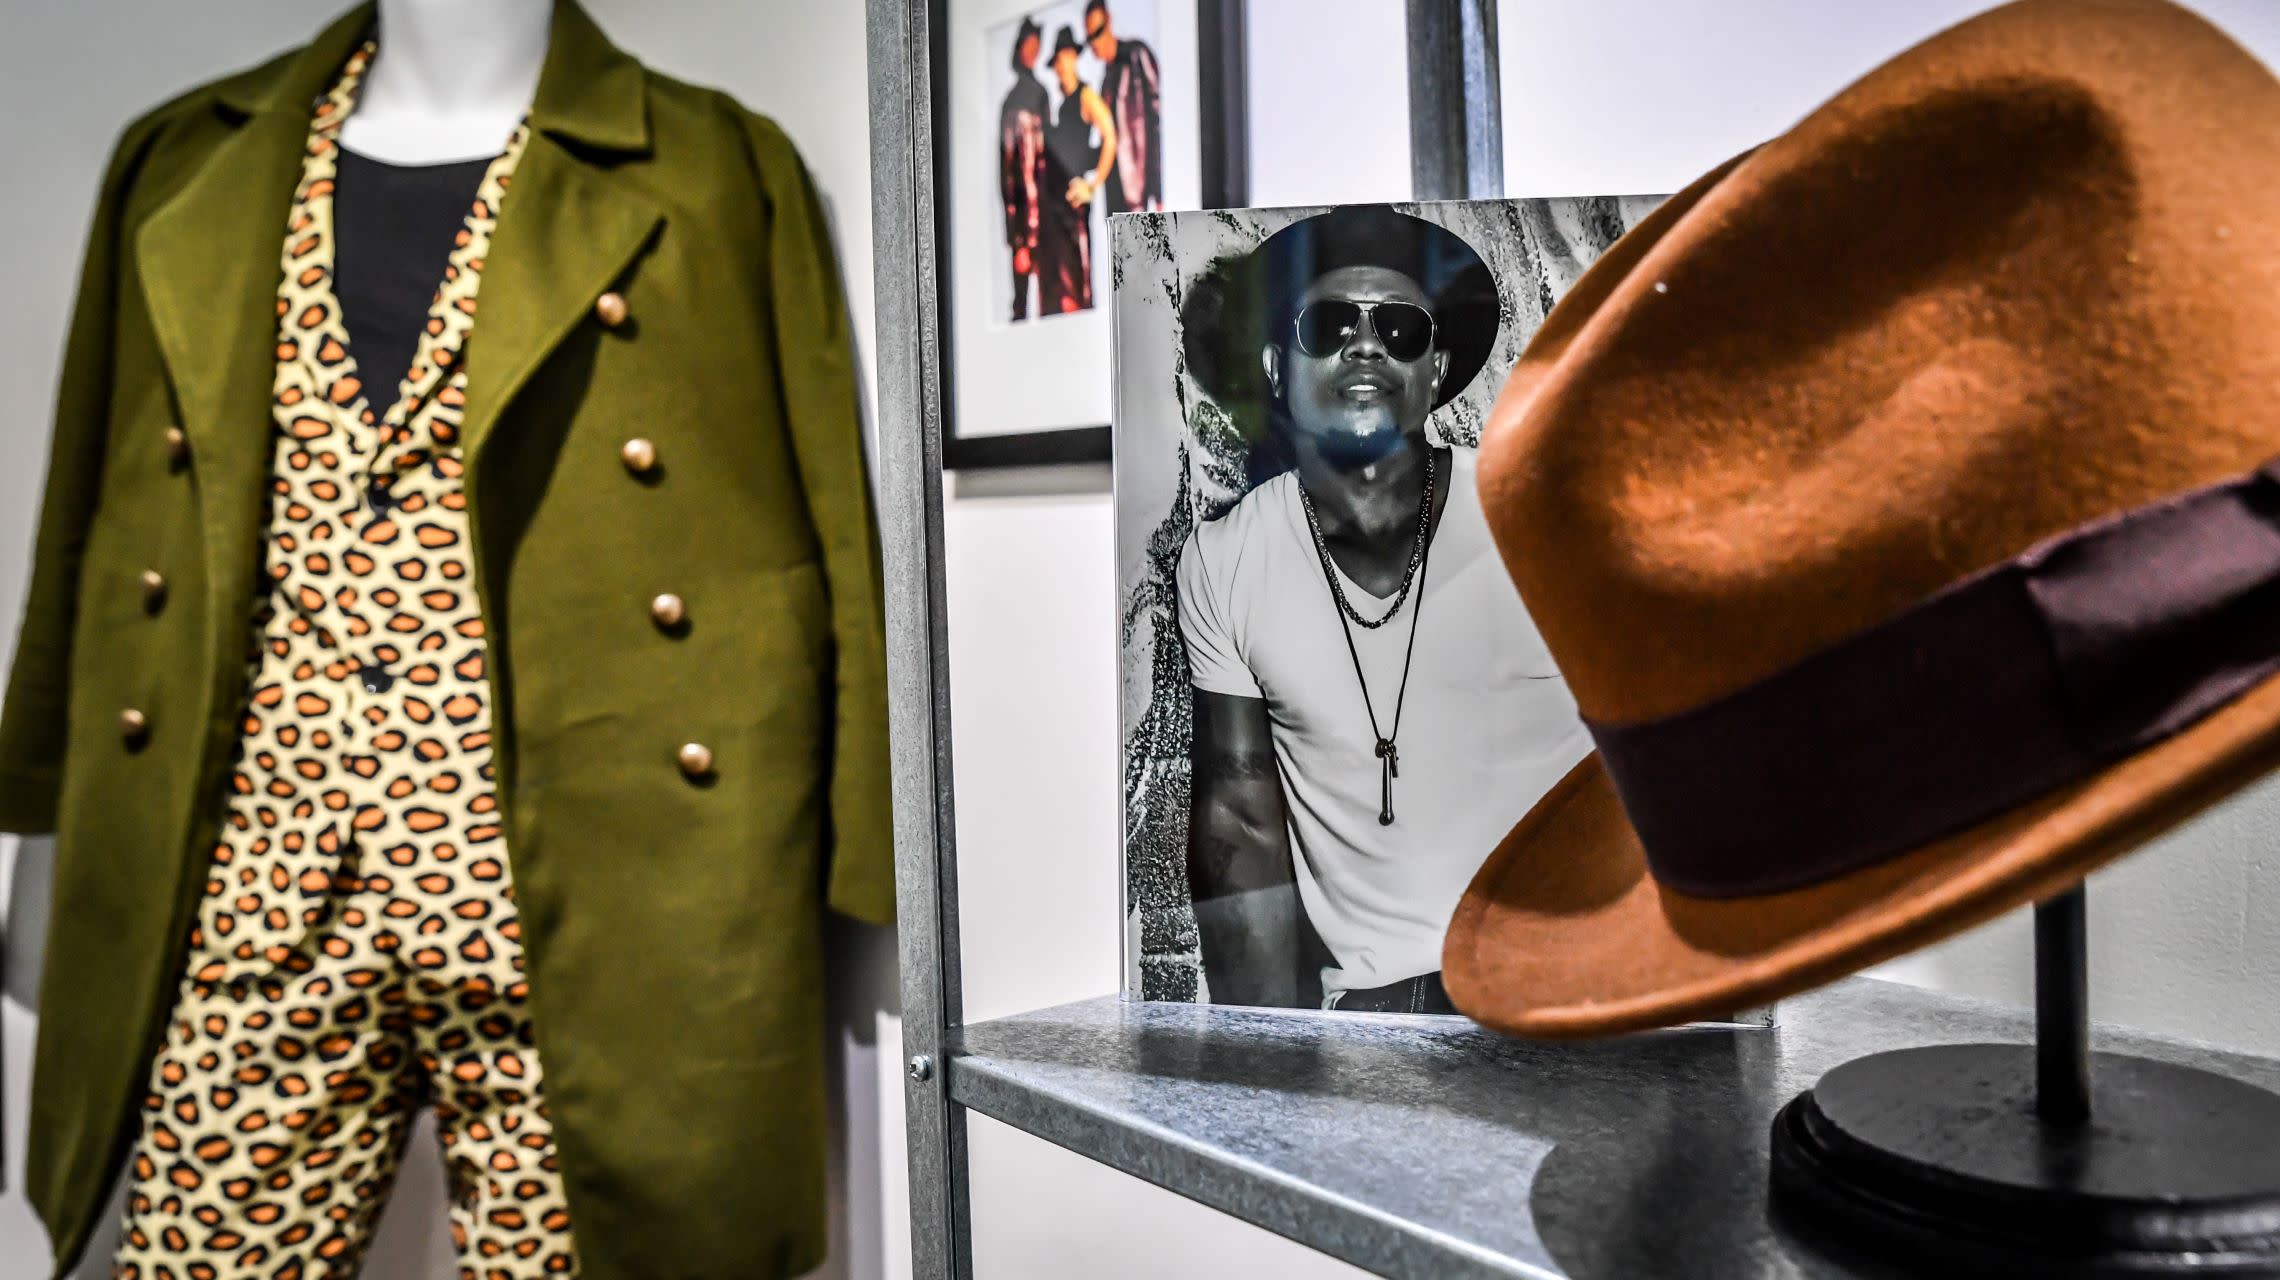 hat and outfit on display in exhibit